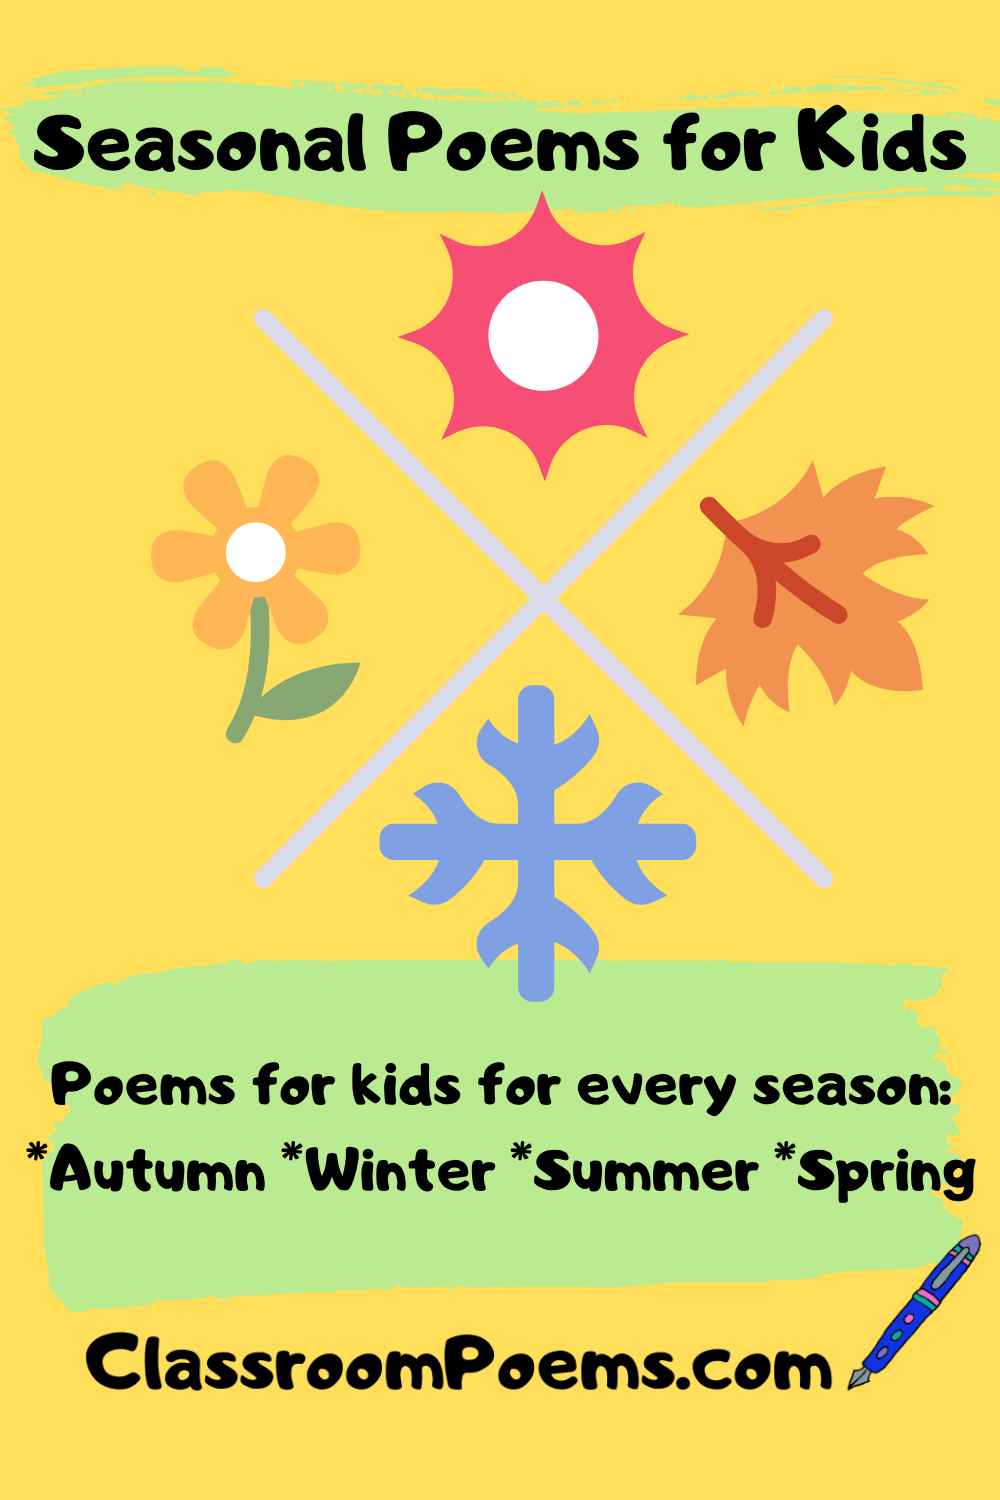 Poems about the four seasons by Denise Rodgers on ClassroomPoems.com.